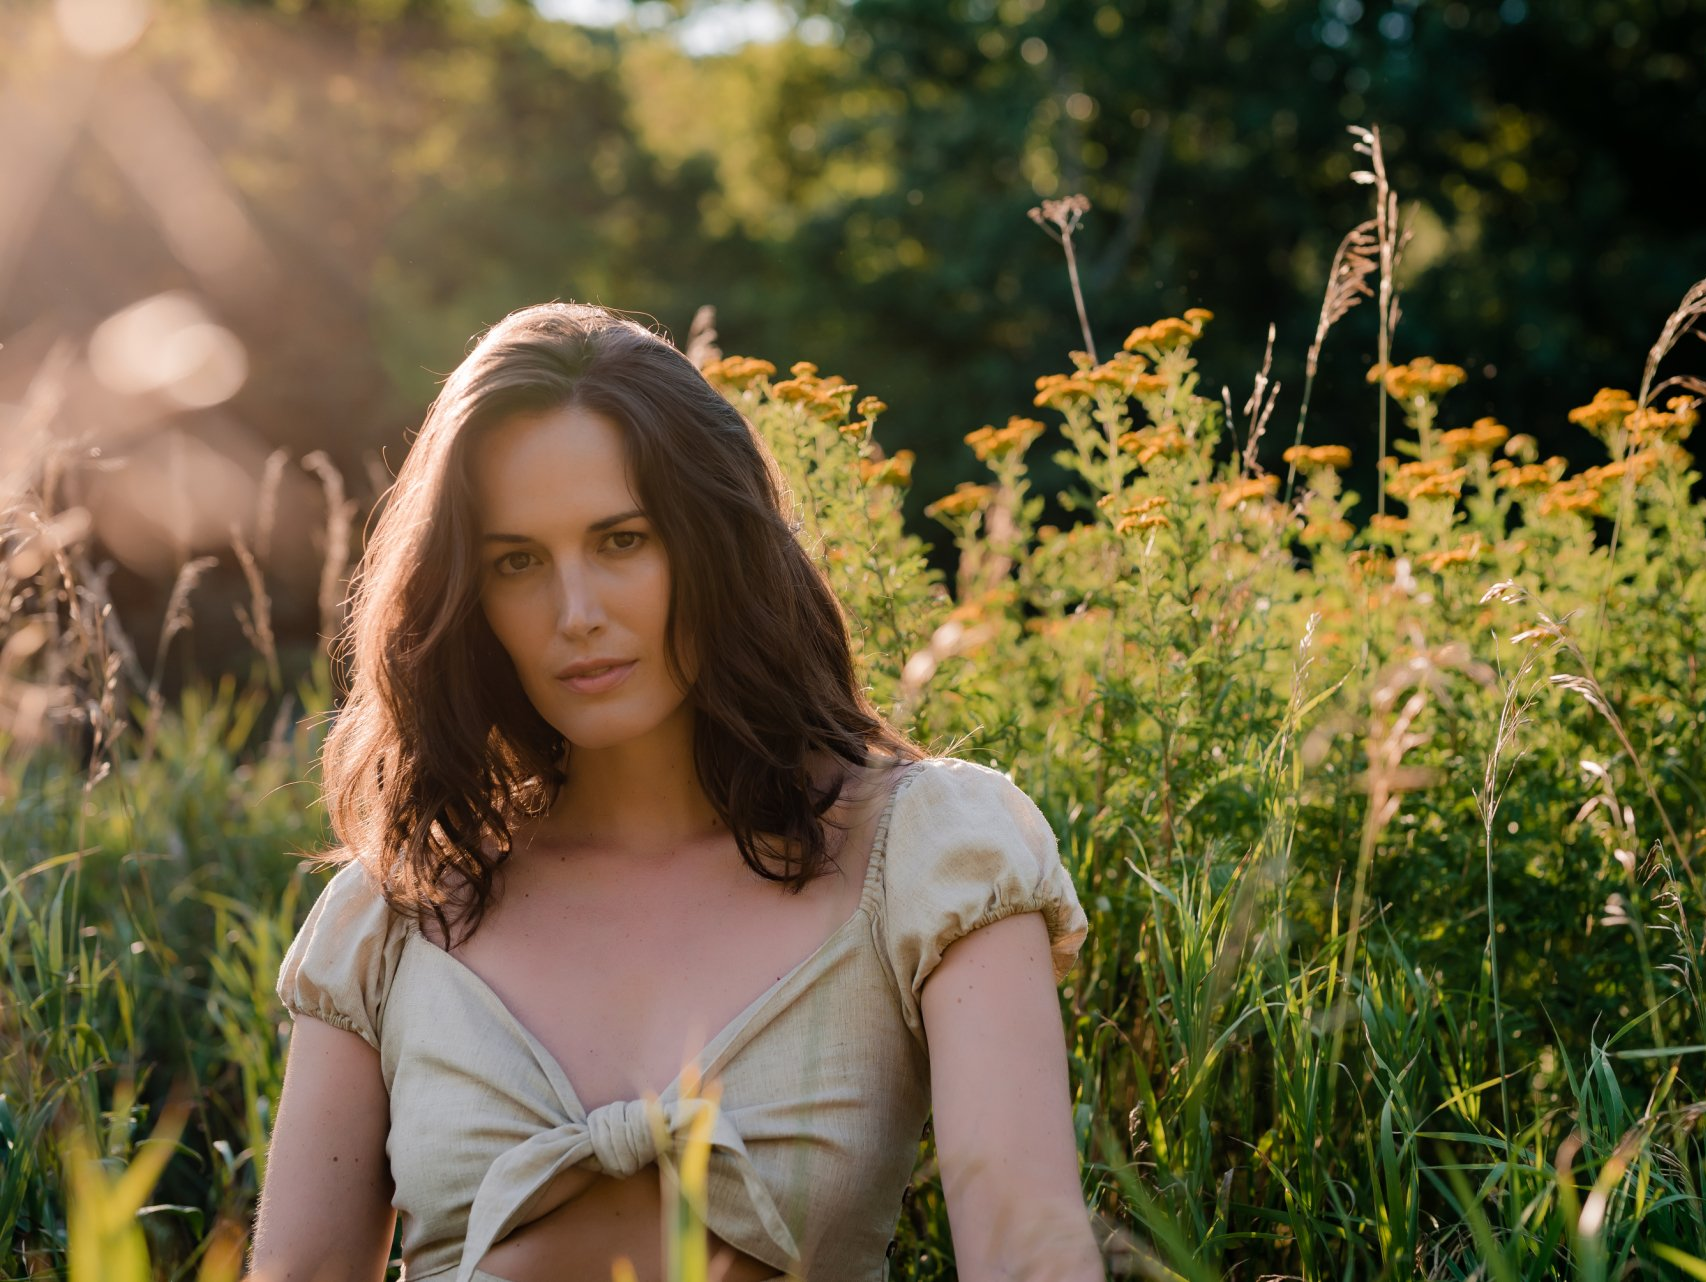 Personal branding photo of a woman with brunette hair wearing a halter top while standing in front of field of tall, golden wild flowers